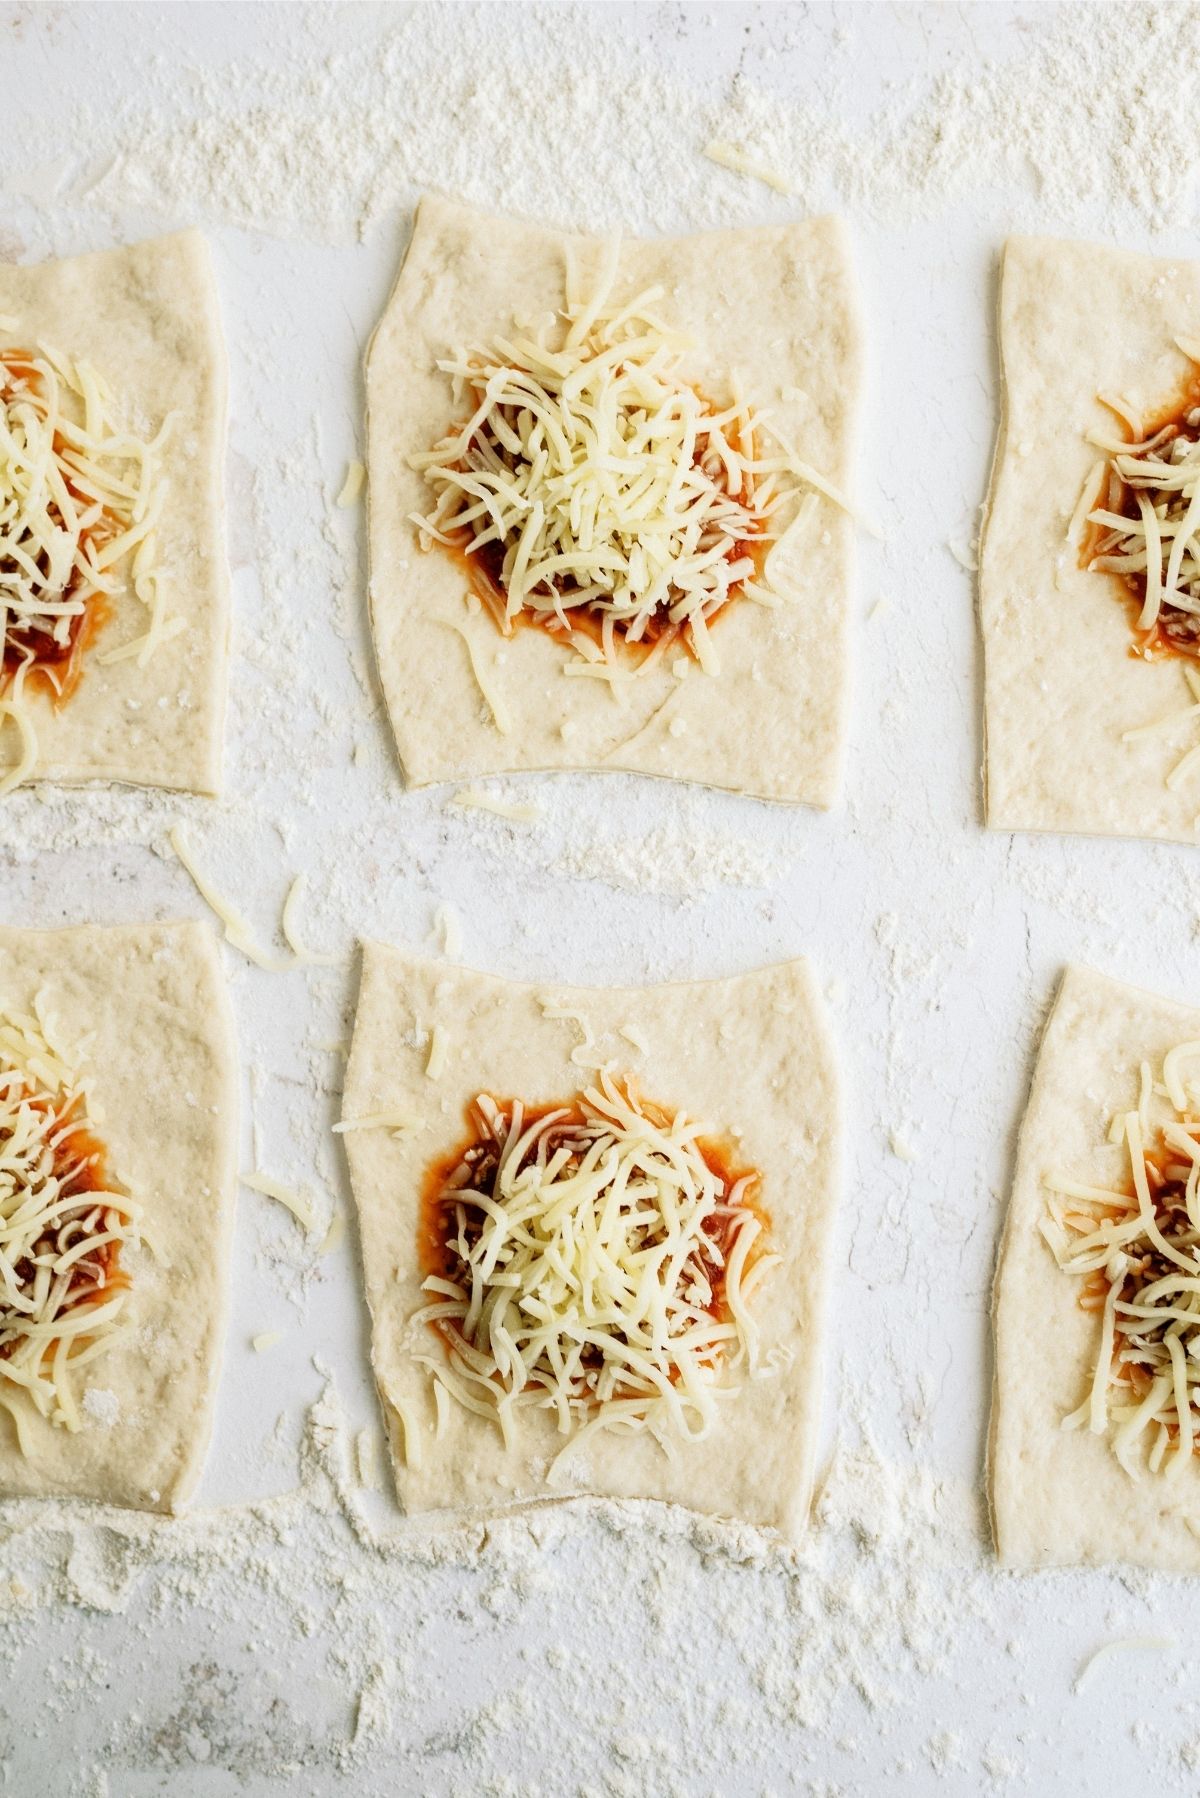 Pizza Dough cut into squares with sauce, toppings and cheese